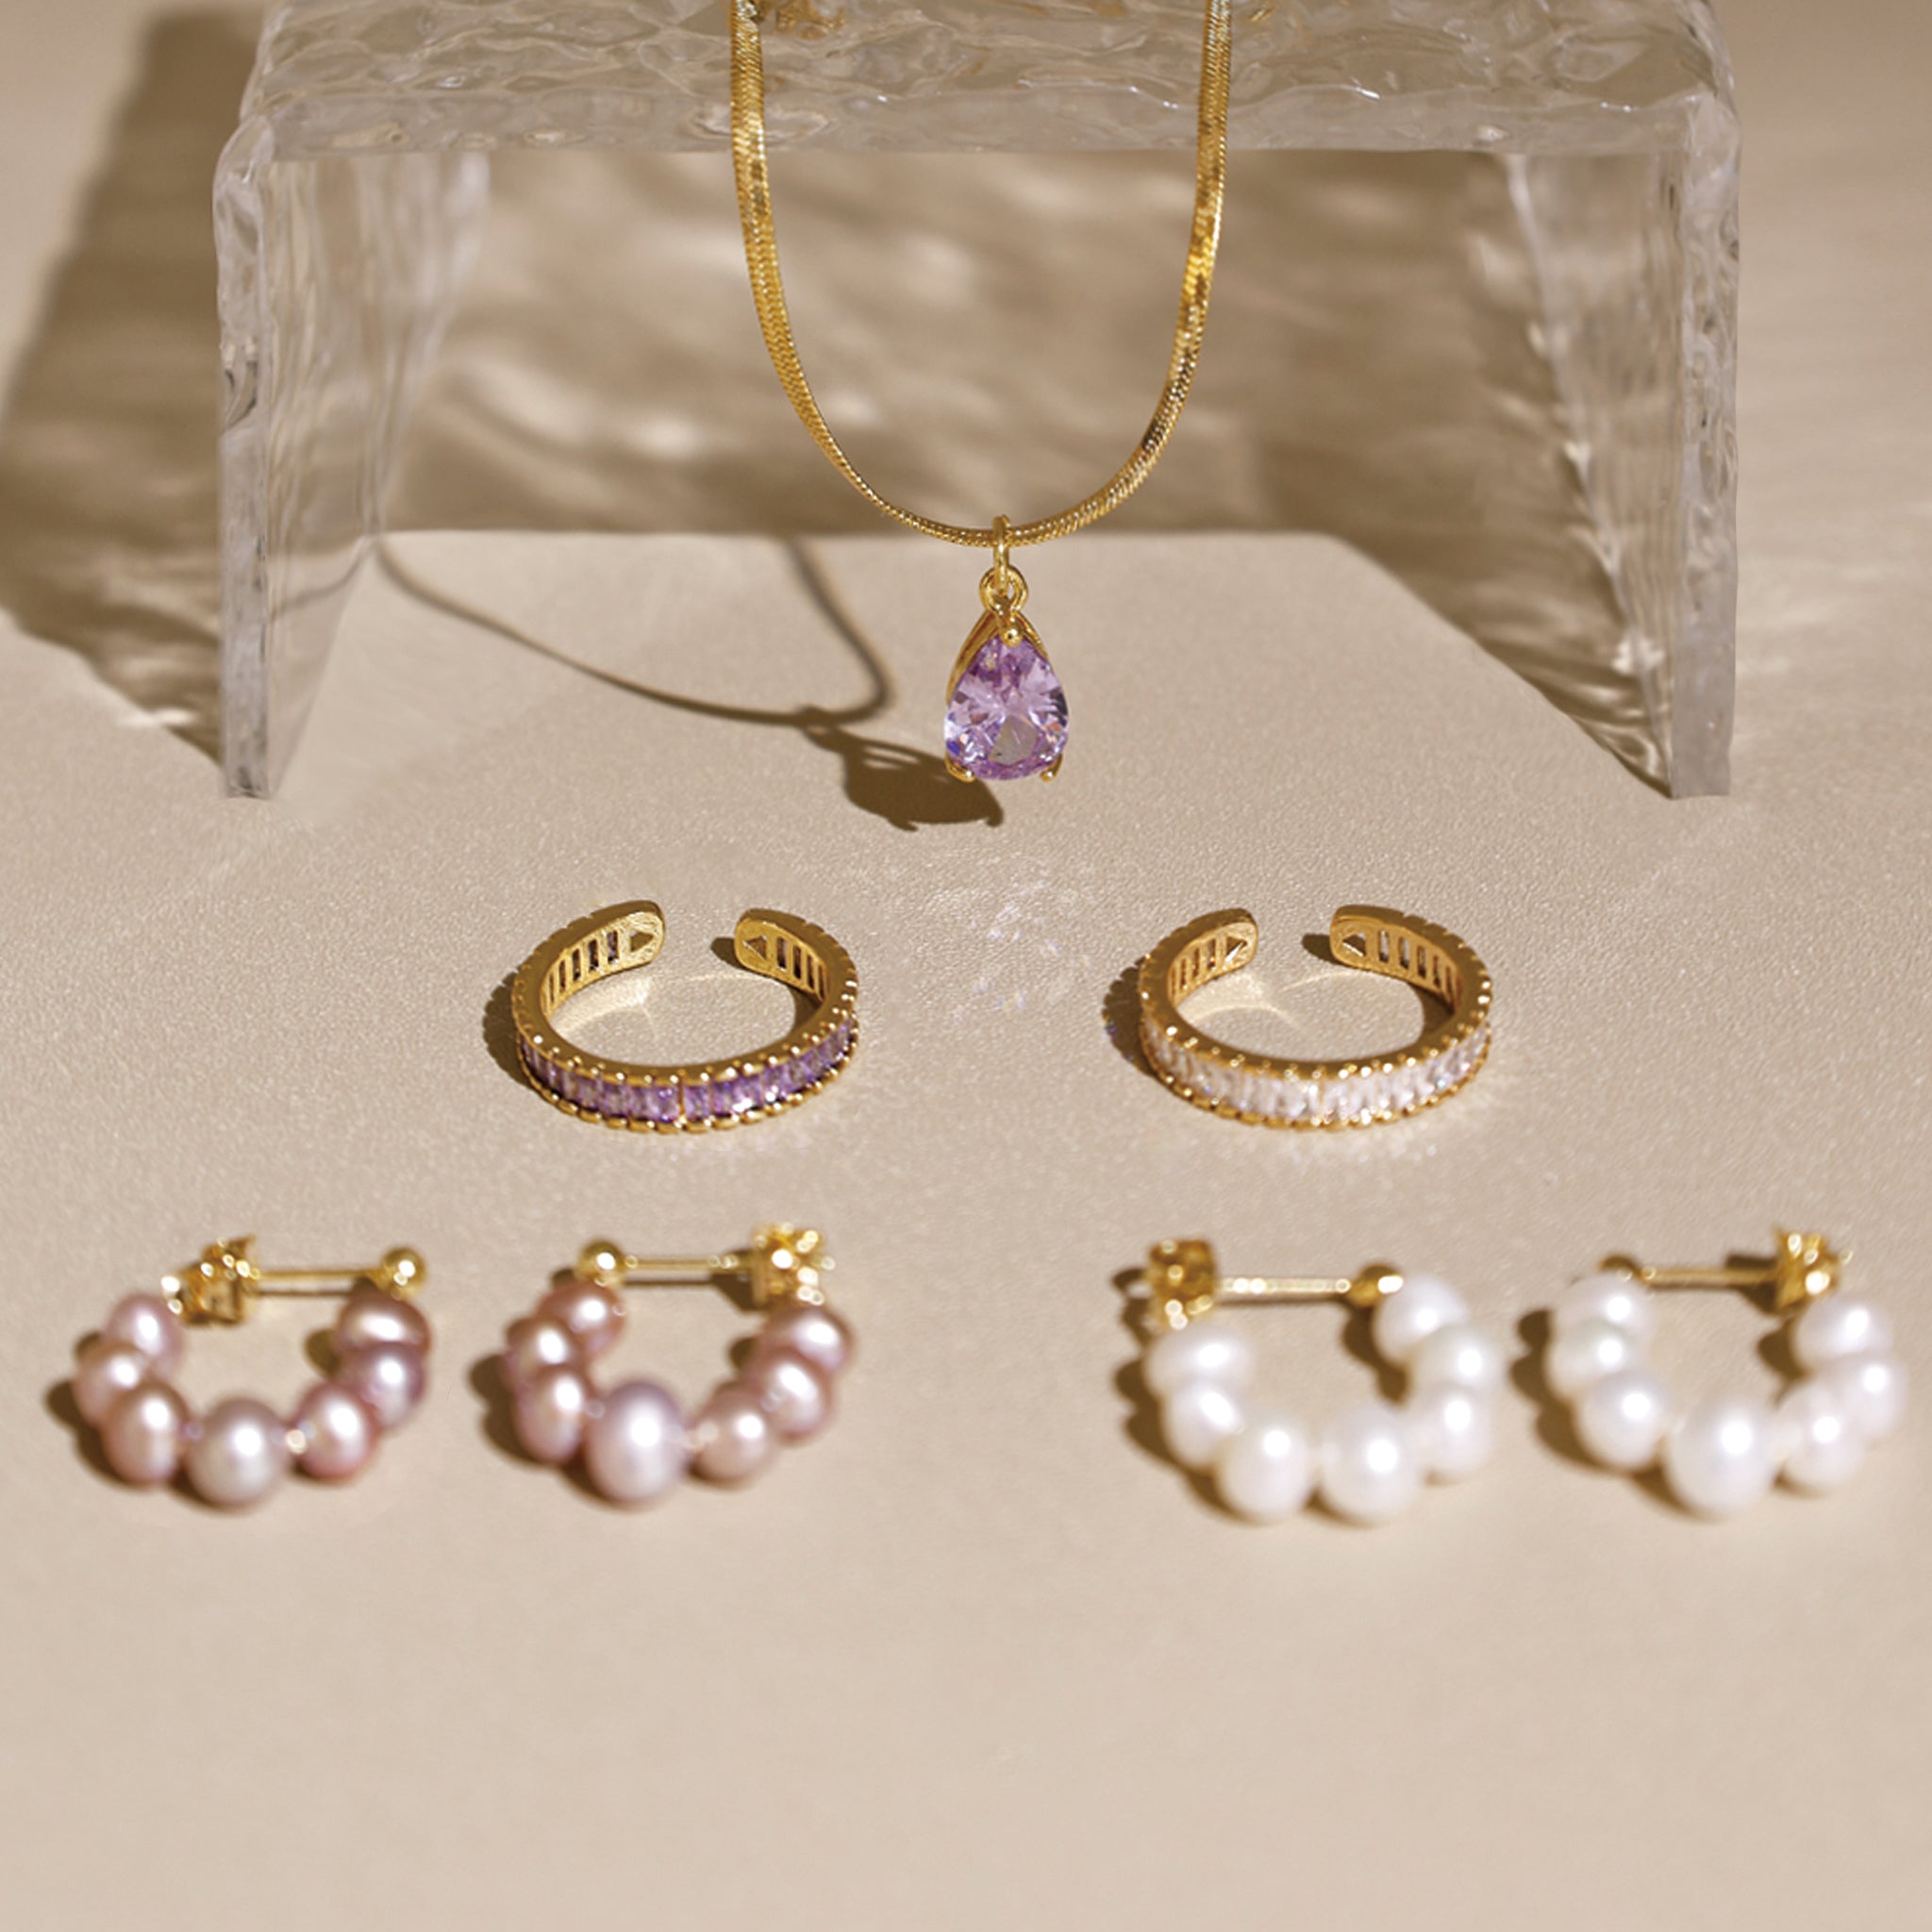 Jewelry with Meaning—Friendship: Celebrating Connections with La Clair Jewelry